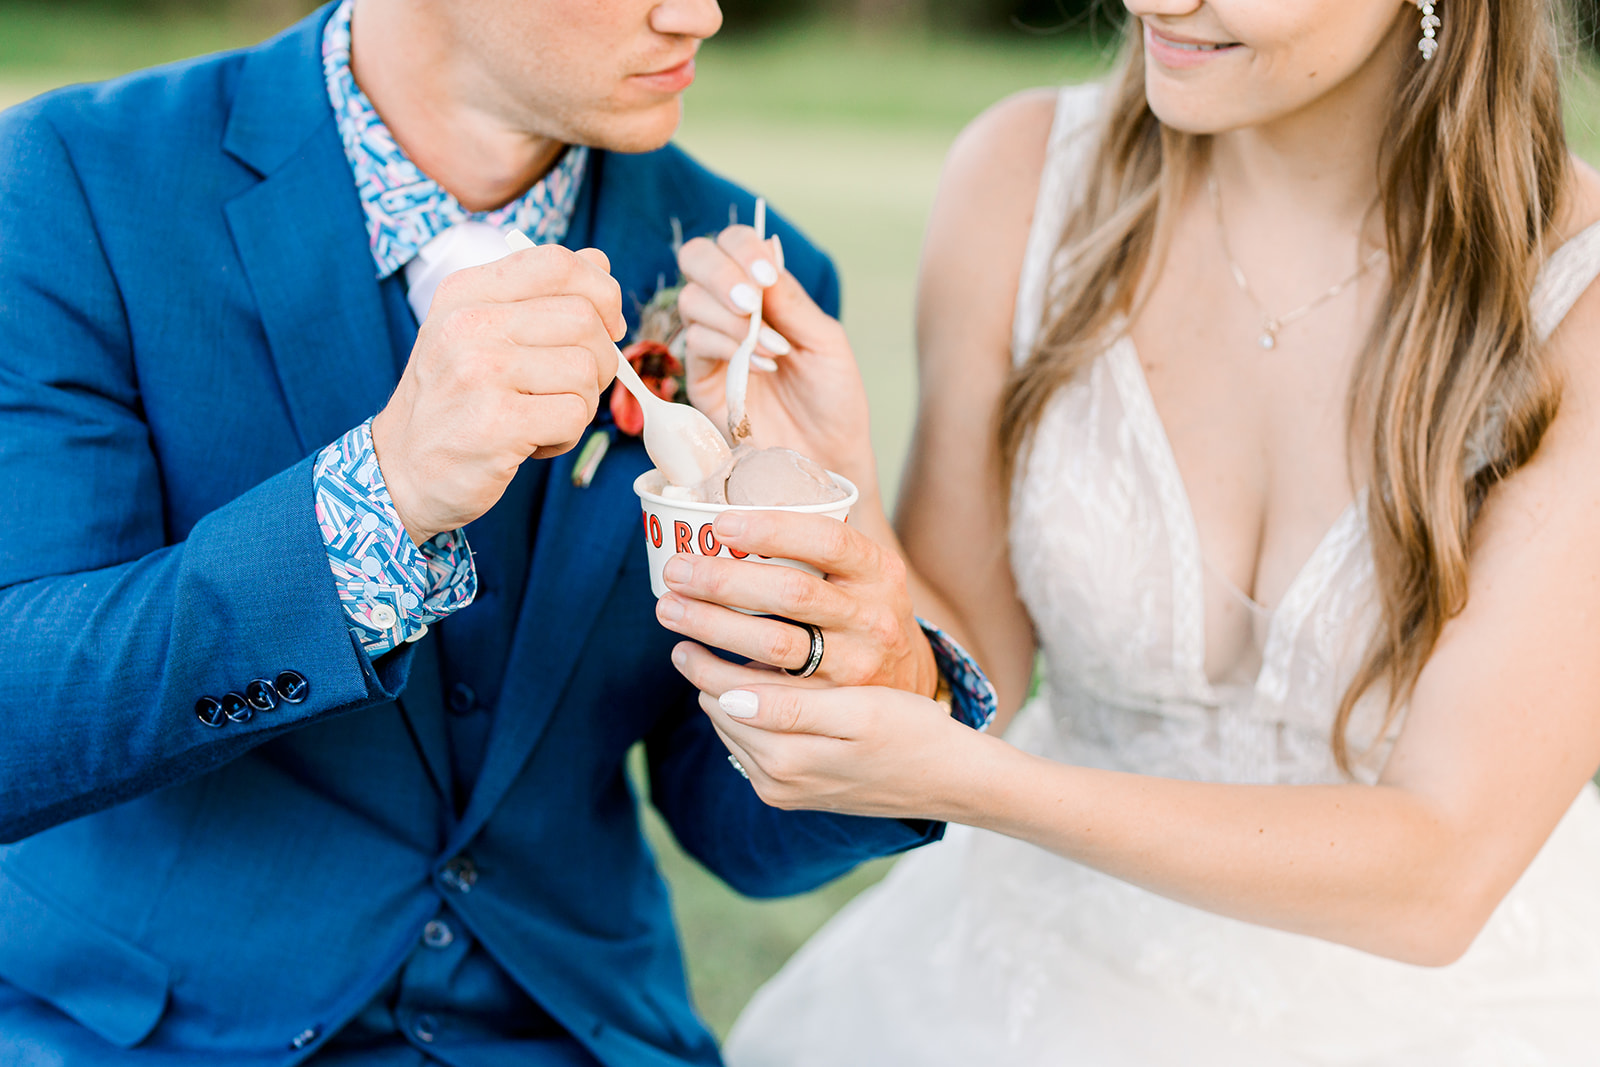 Couple sharing ice cream together on wedding day